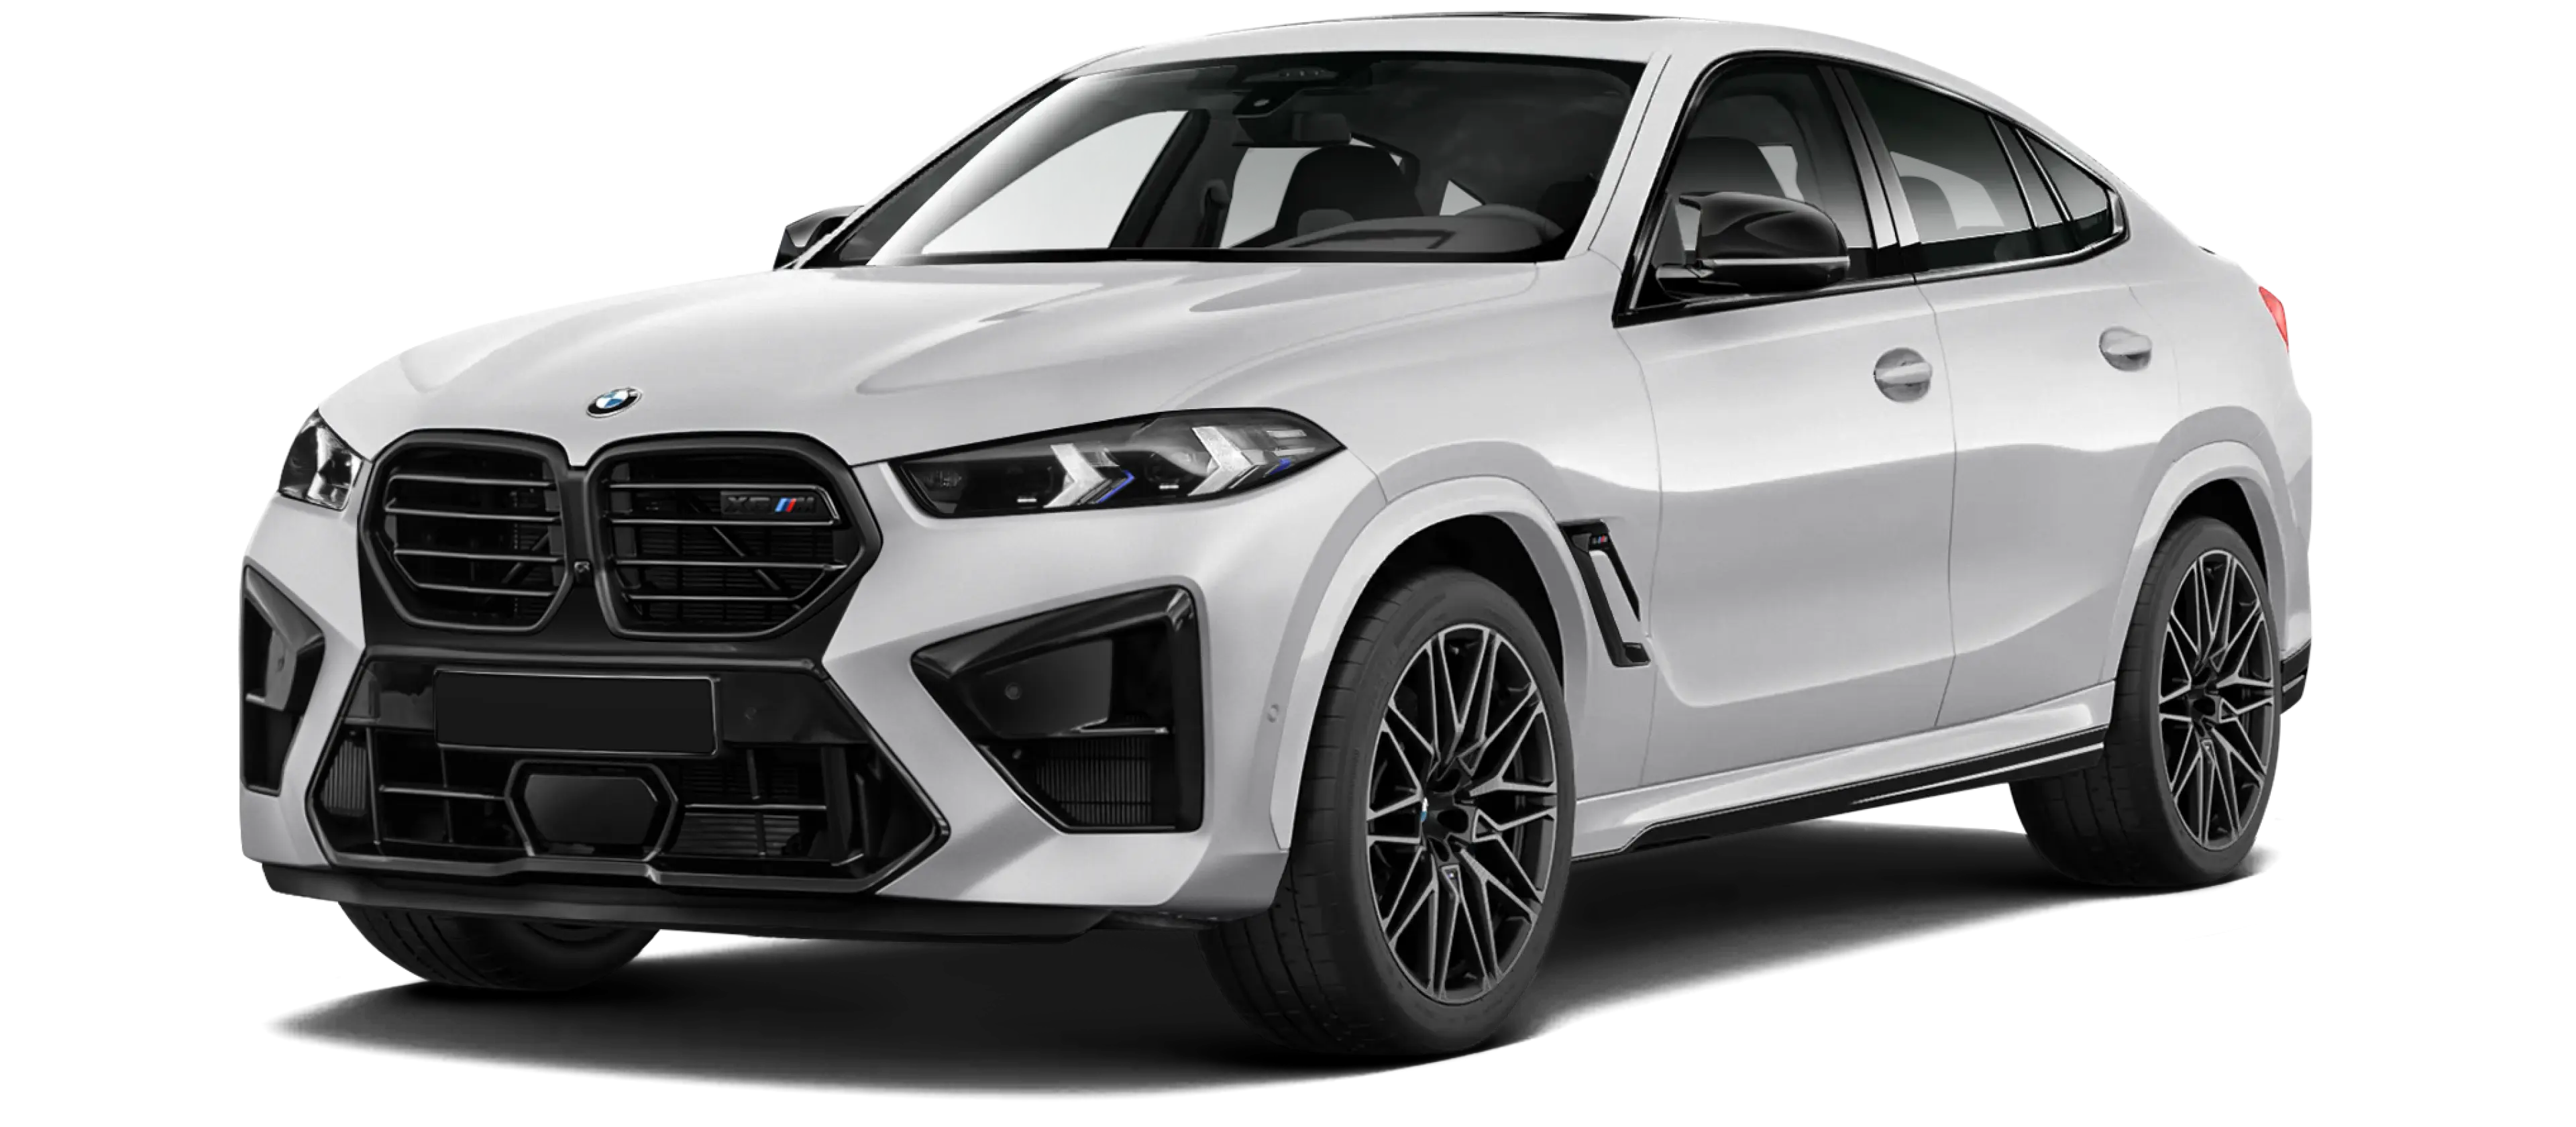 BMW X6M F96 LCI 2023 stock front view in White mineral